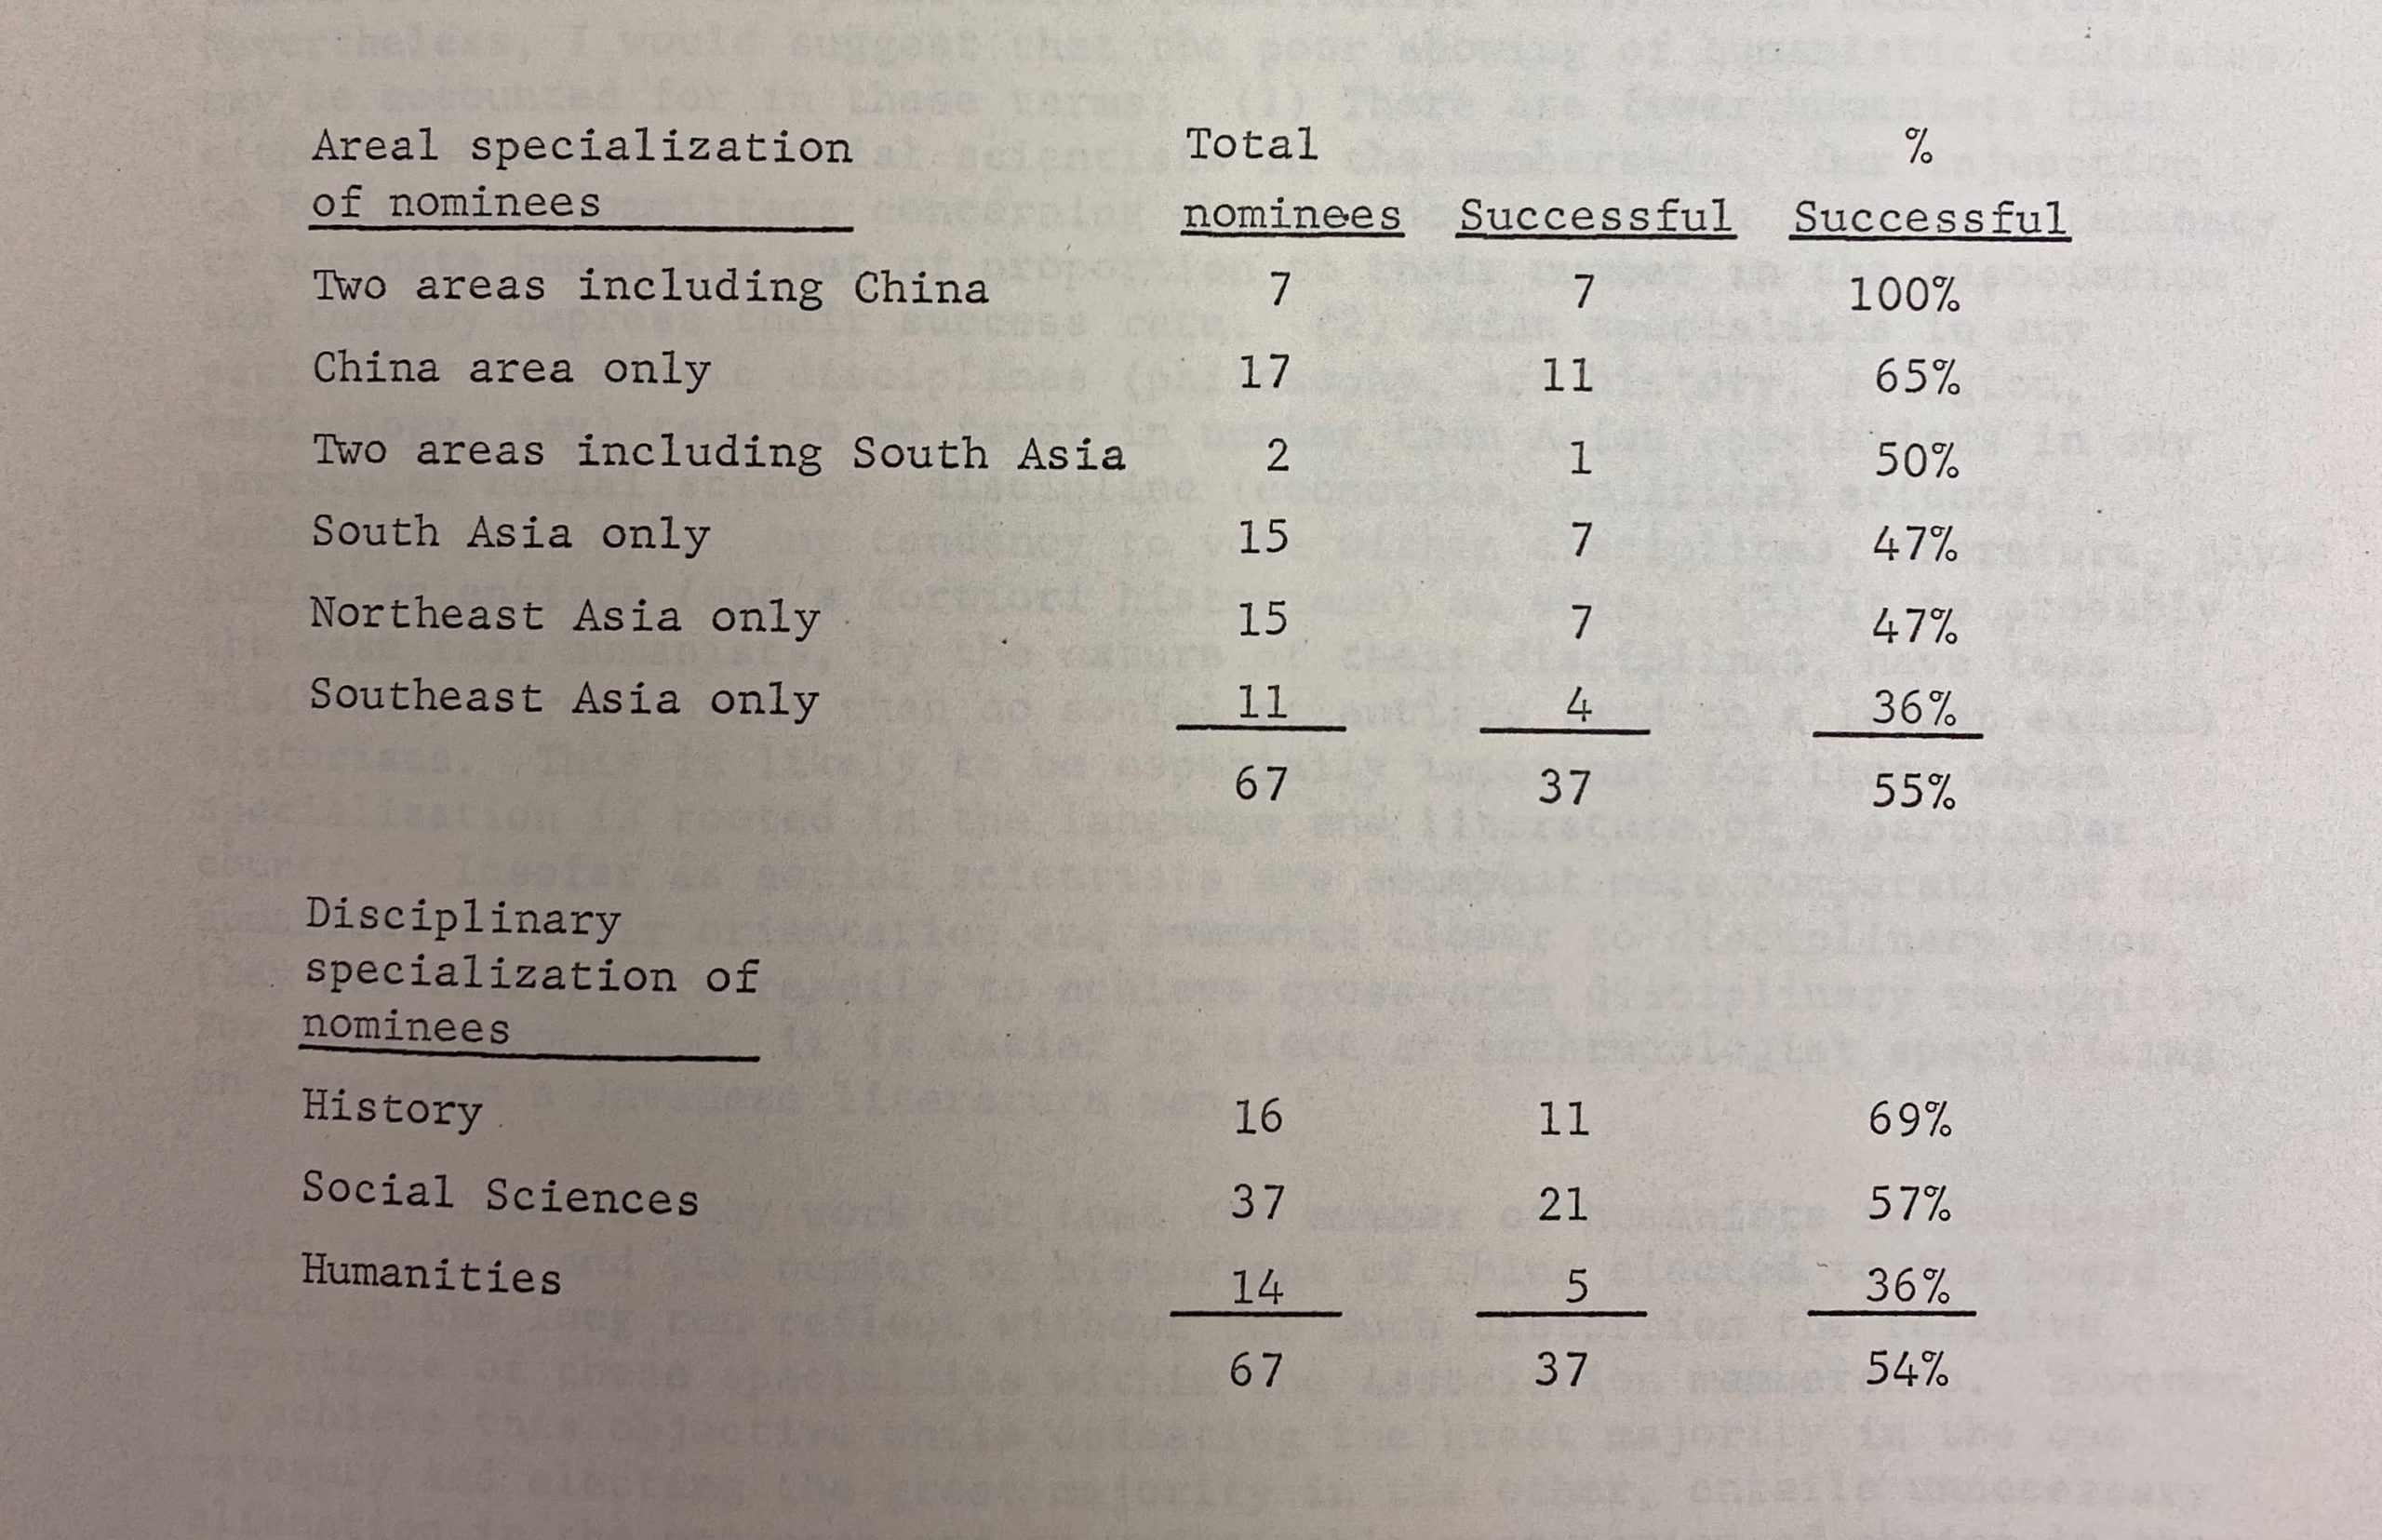 A table of AAS election results broken down by region and specialty, from a 1968 report by G. William Skinner